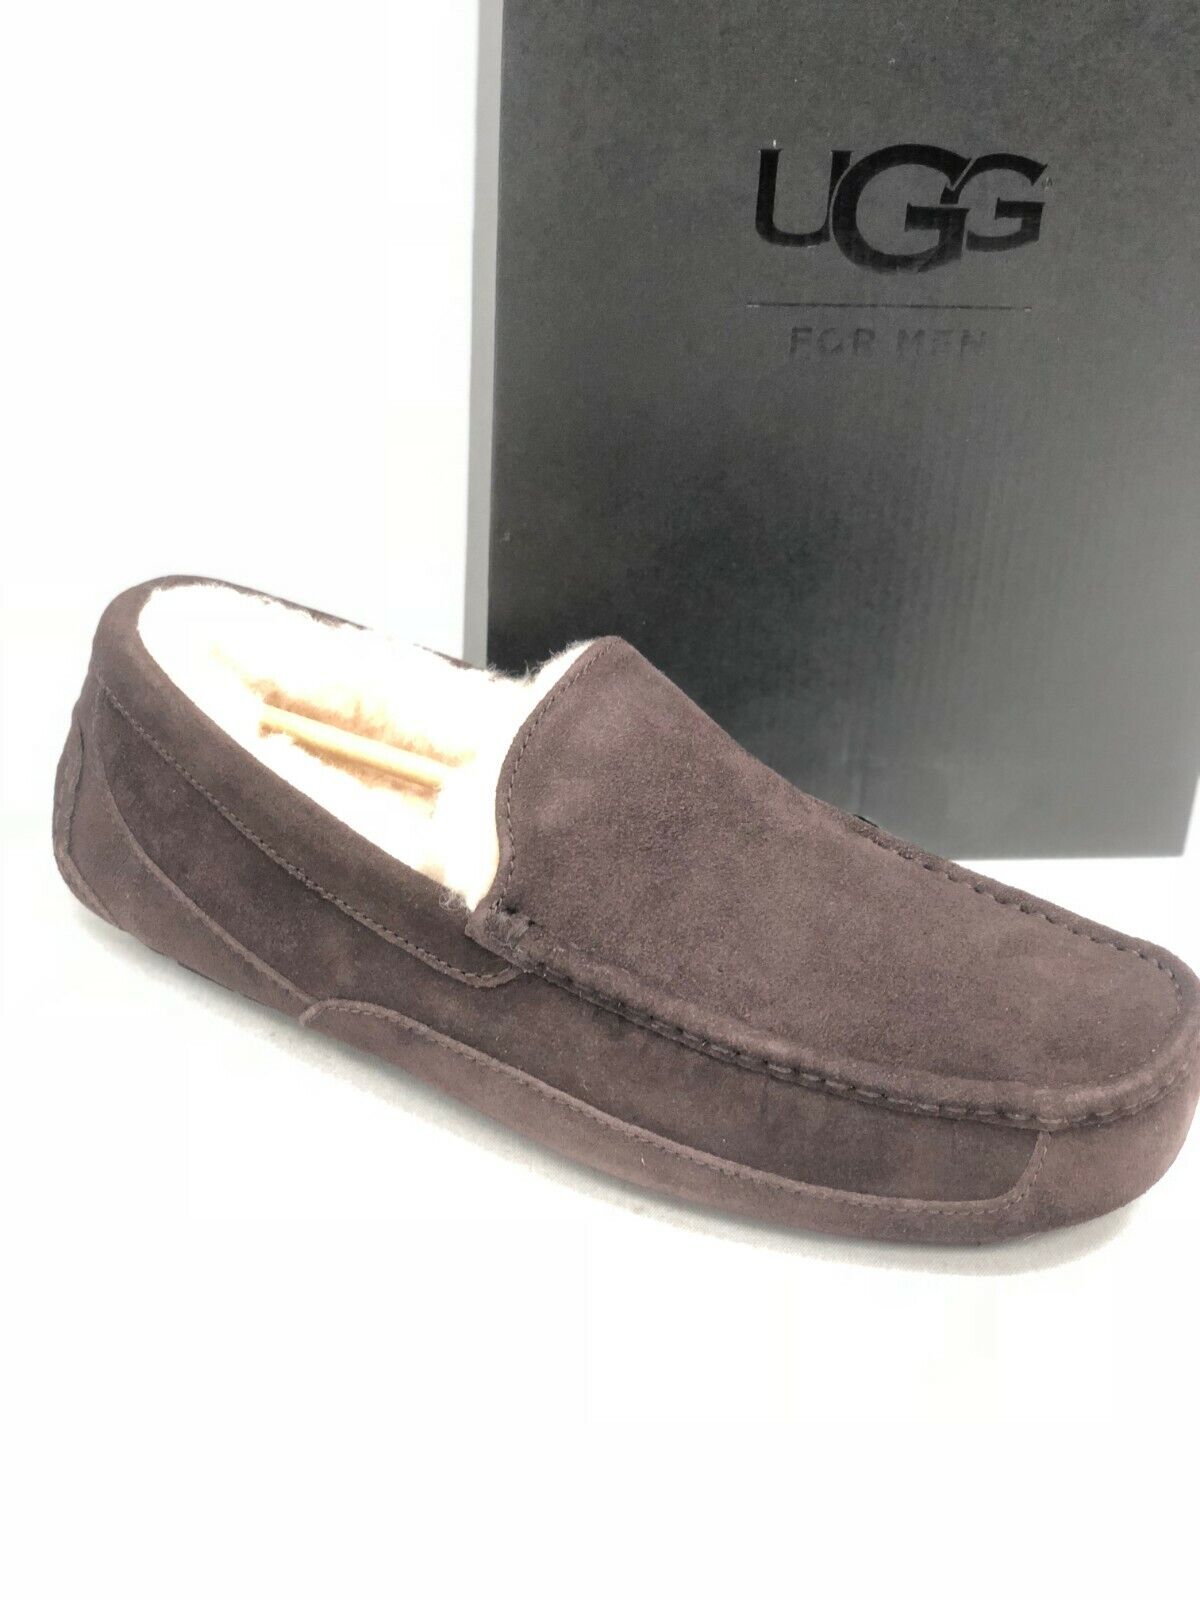 UGG Men's Ascot Slippers 1101110 Shoes Sheepskin Suede Multiple Colors